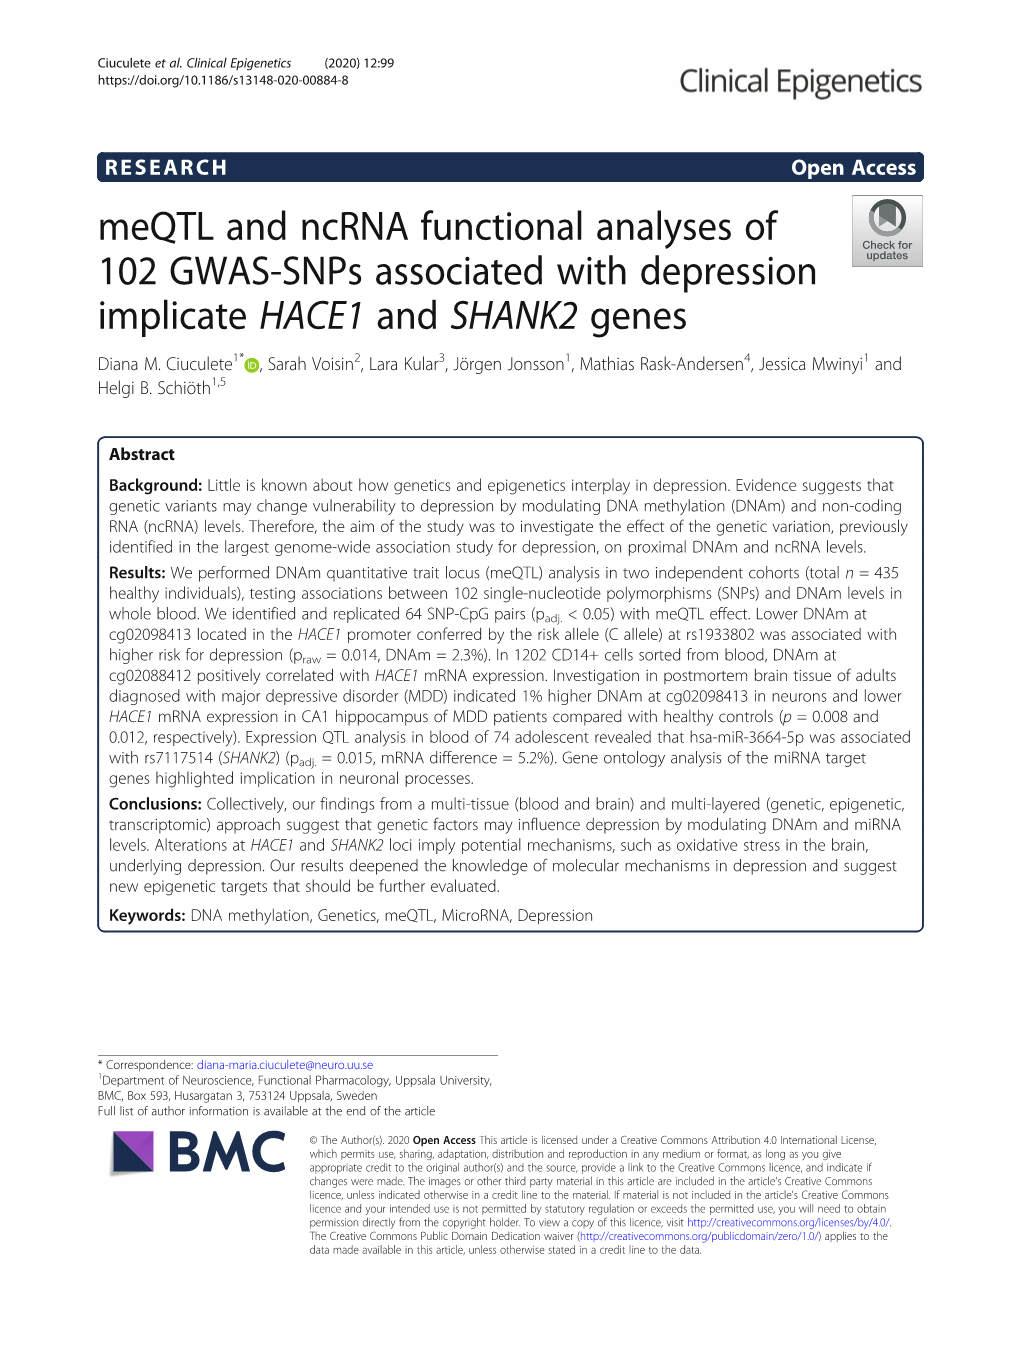 Meqtl and Ncrna Functional Analyses of 102 GWAS-Snps Associated with Depression Implicate HACE1 and SHANK2 Genes Diana M